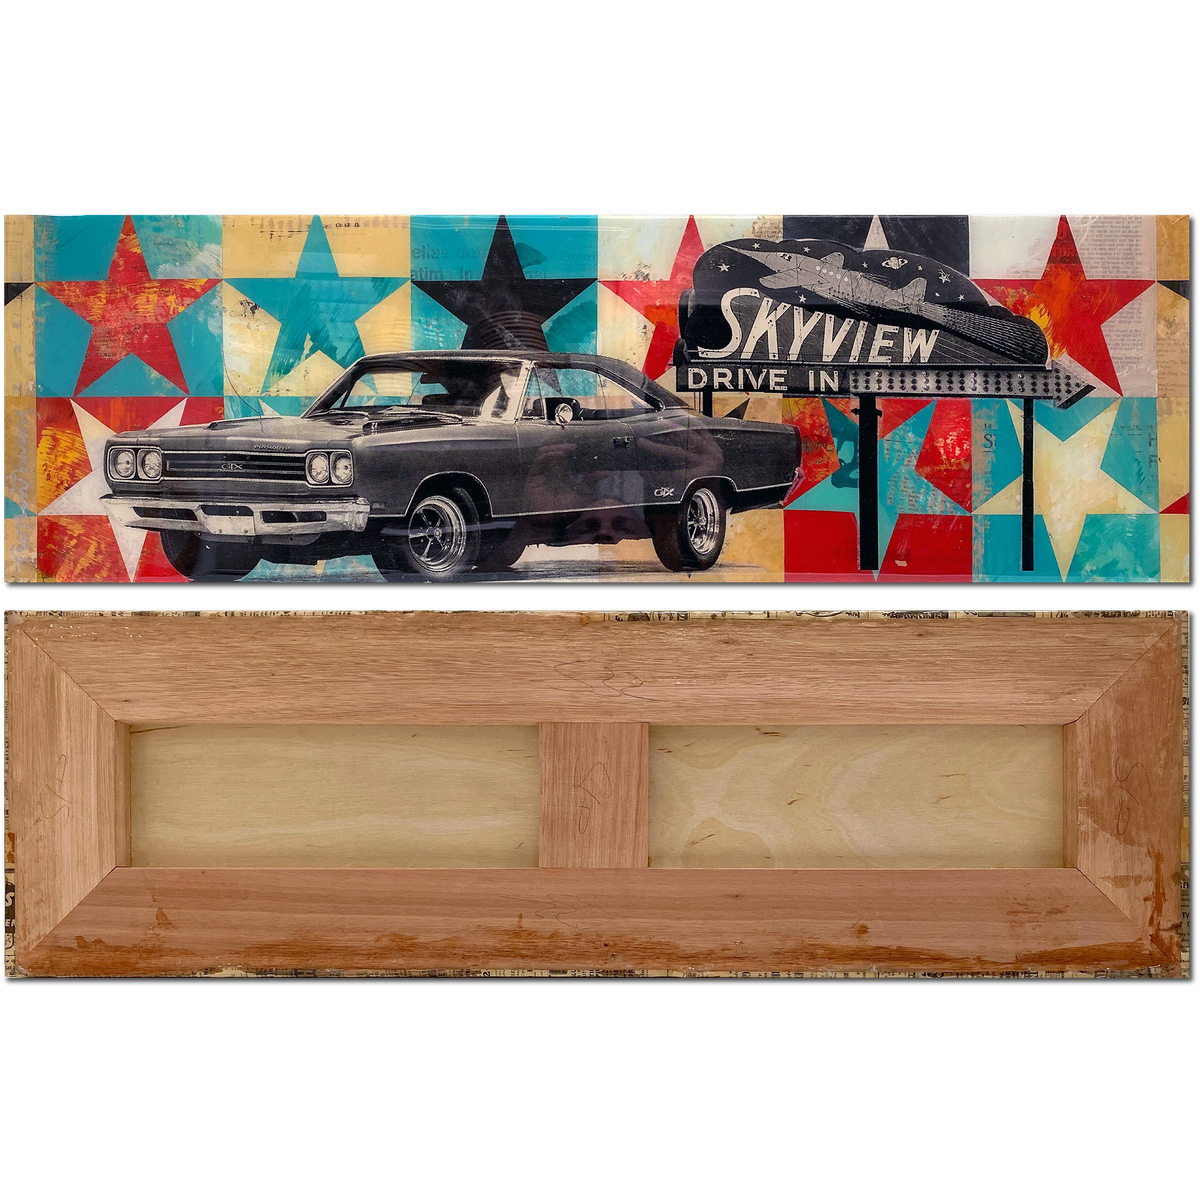 Robert Mars &quot;Friday Drive In&quot; - Original Painting &amp; Hand-Embellished AP Skate Deck